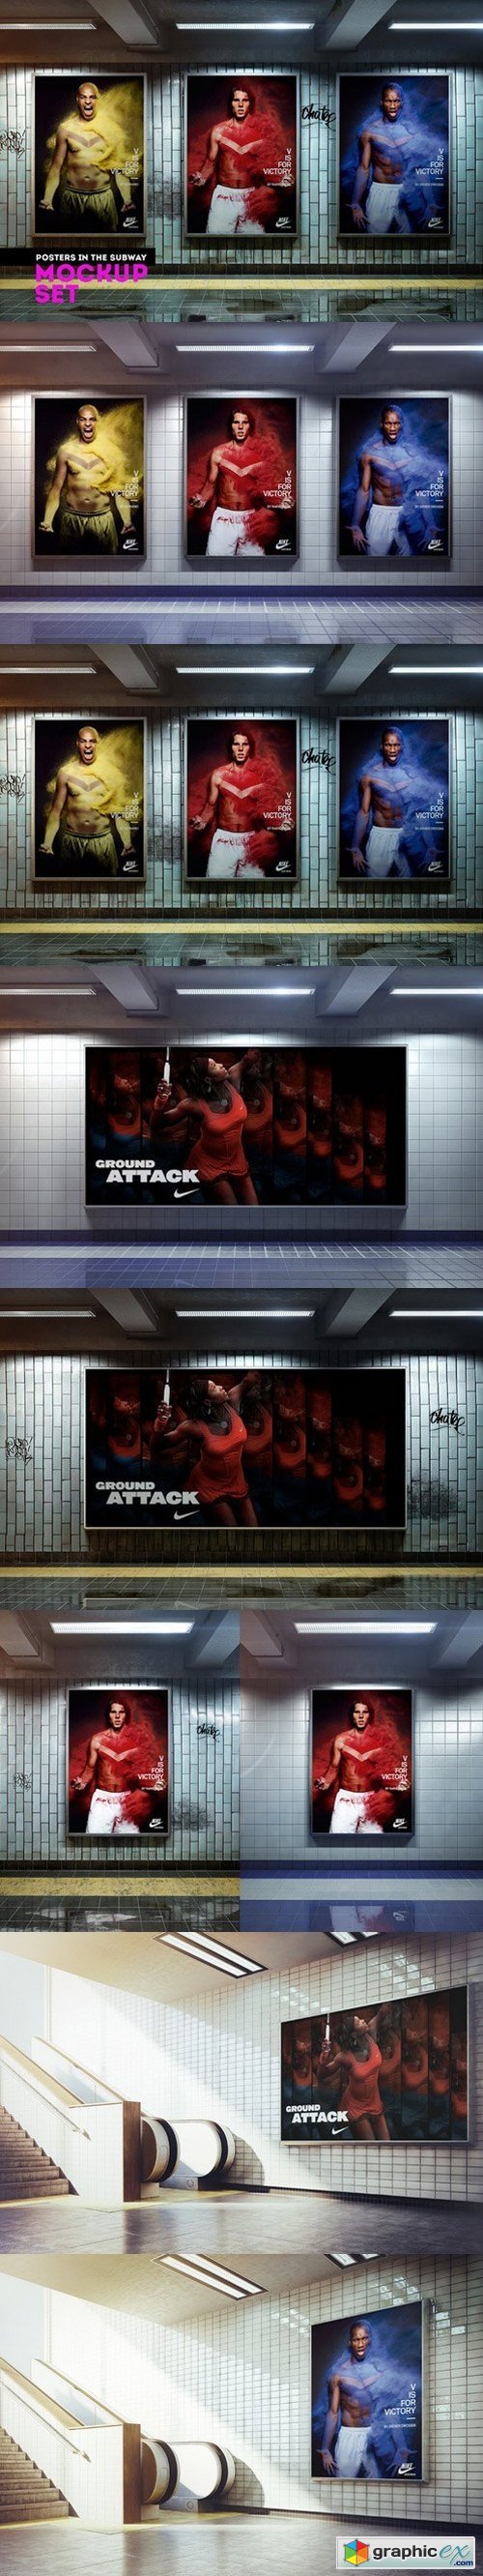 Posters in the subway Mockup Set